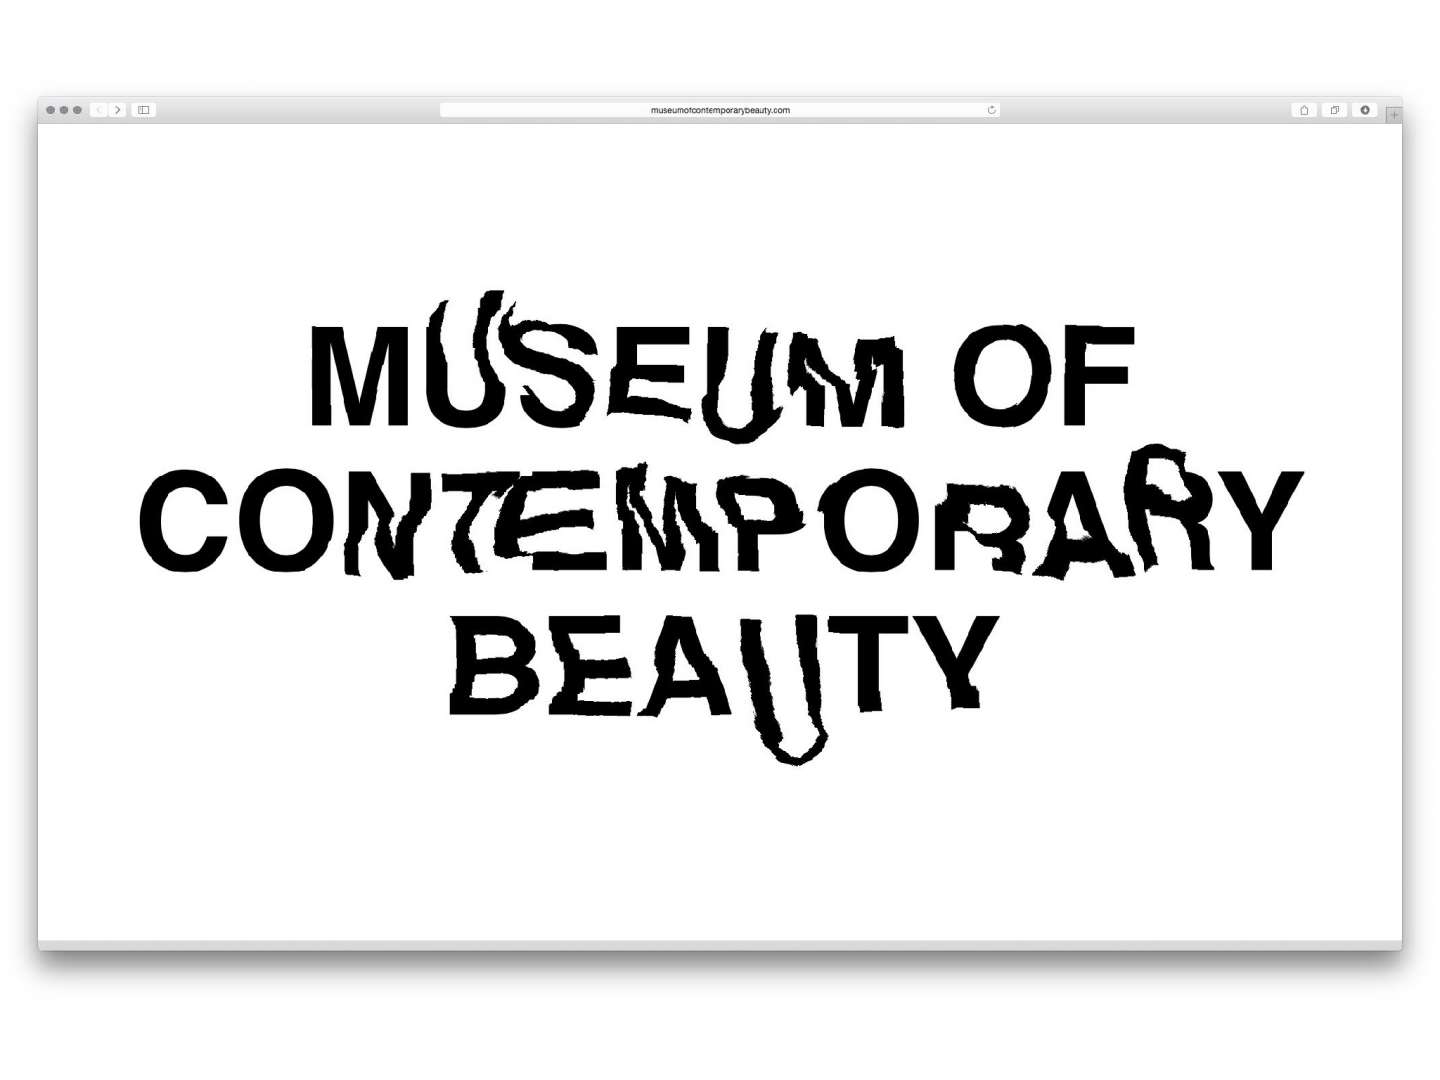 Museum of Contemporary Beauty